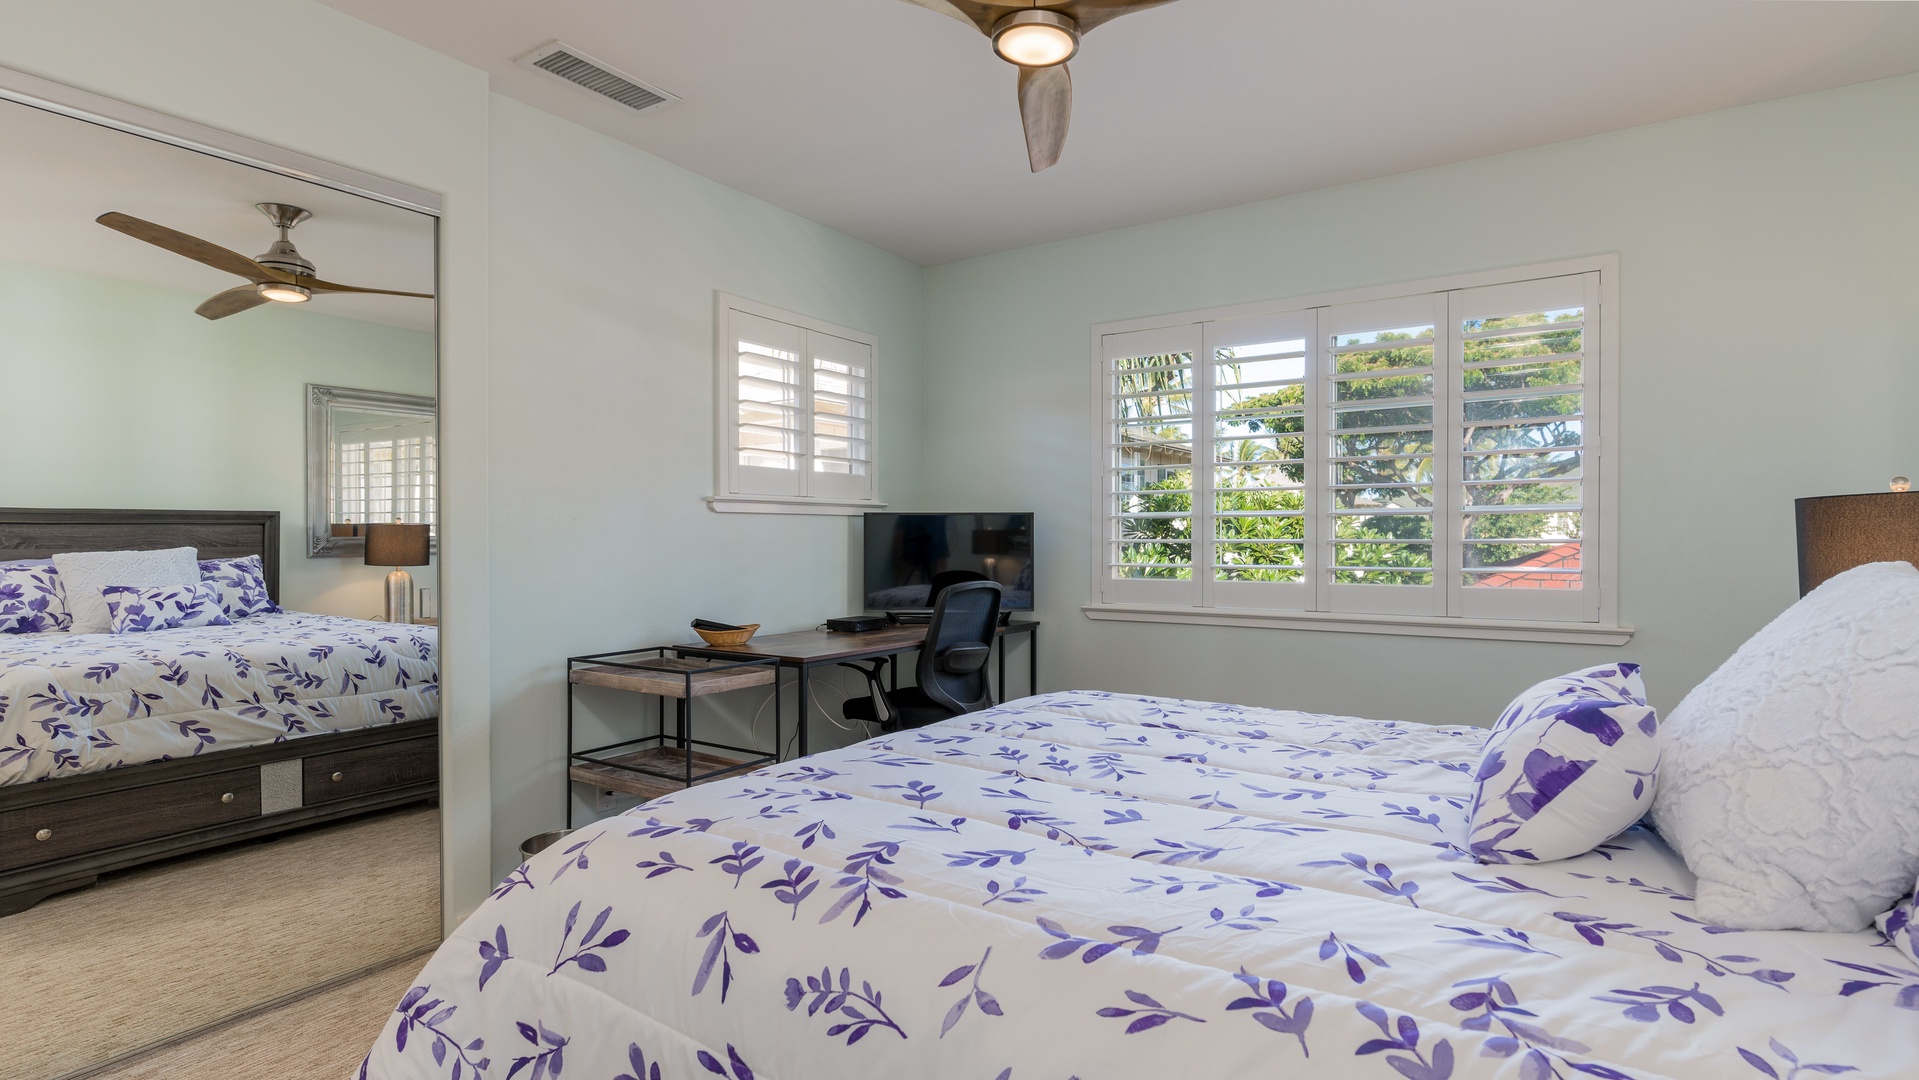 Kapolei Vacation Rentals, Kai Lani 21C - The second guest bedroom is well appointed and inviting.